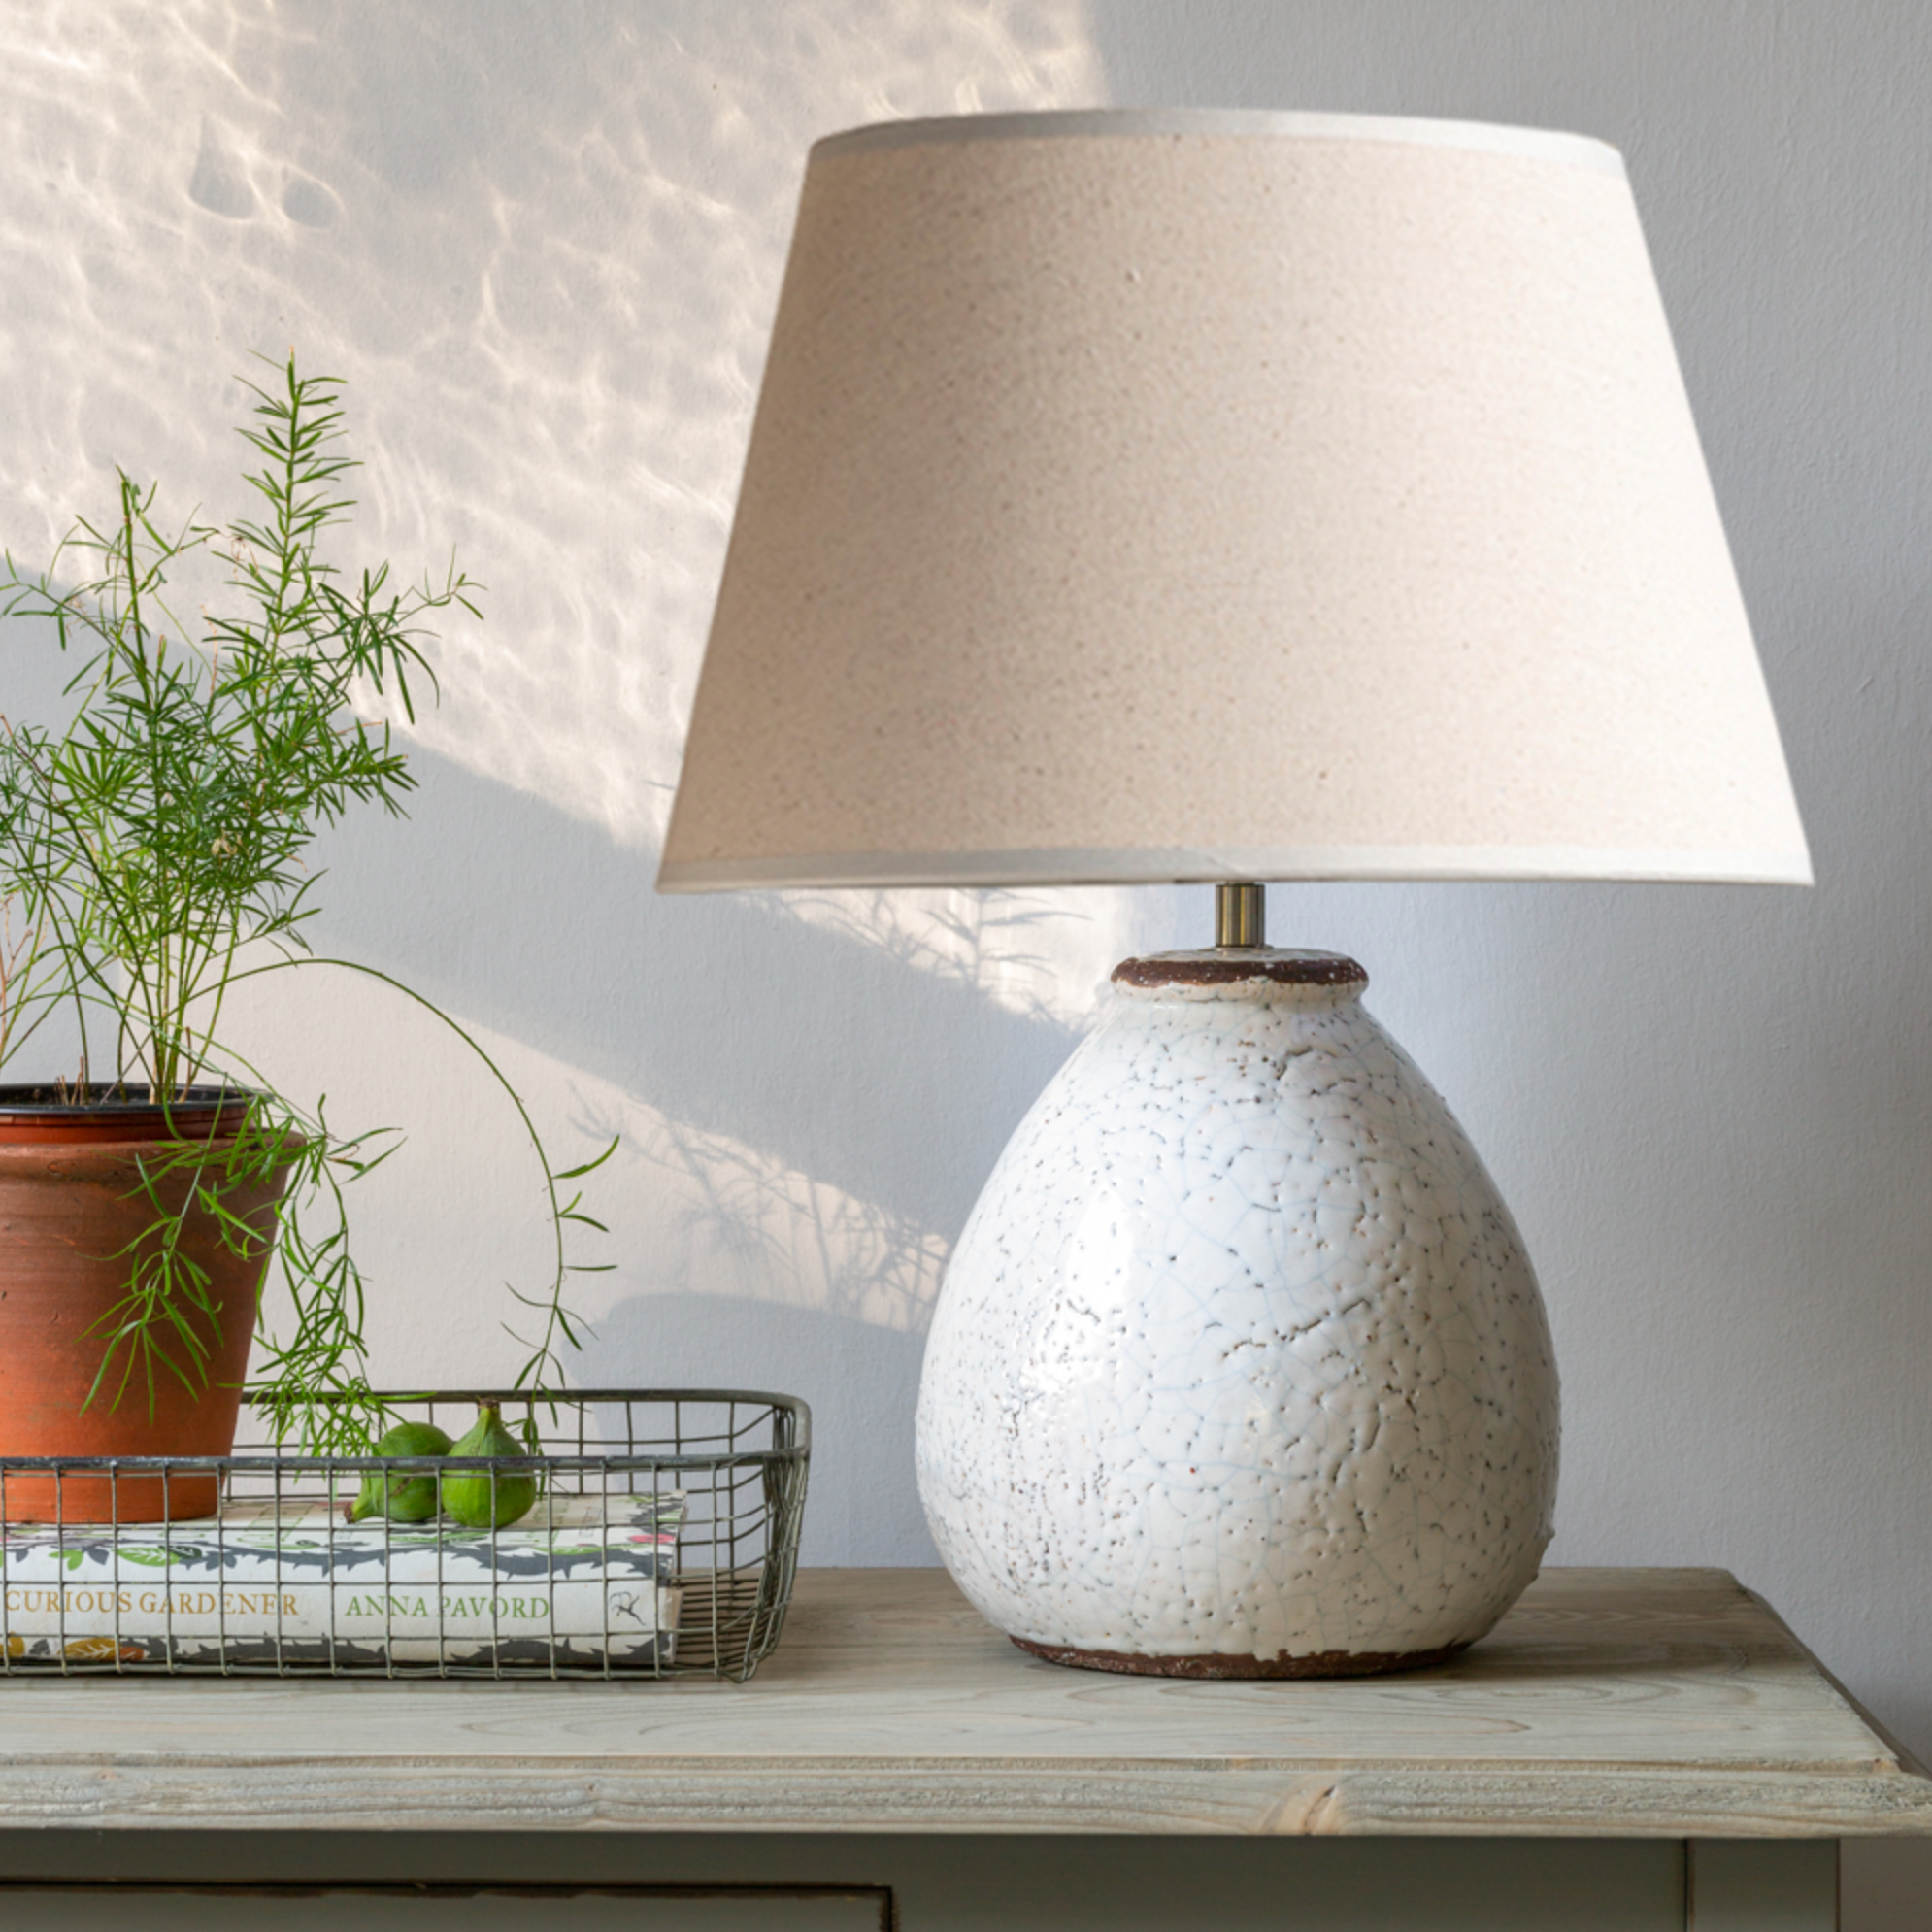 Rustic Lamp with Shade on console with plant.